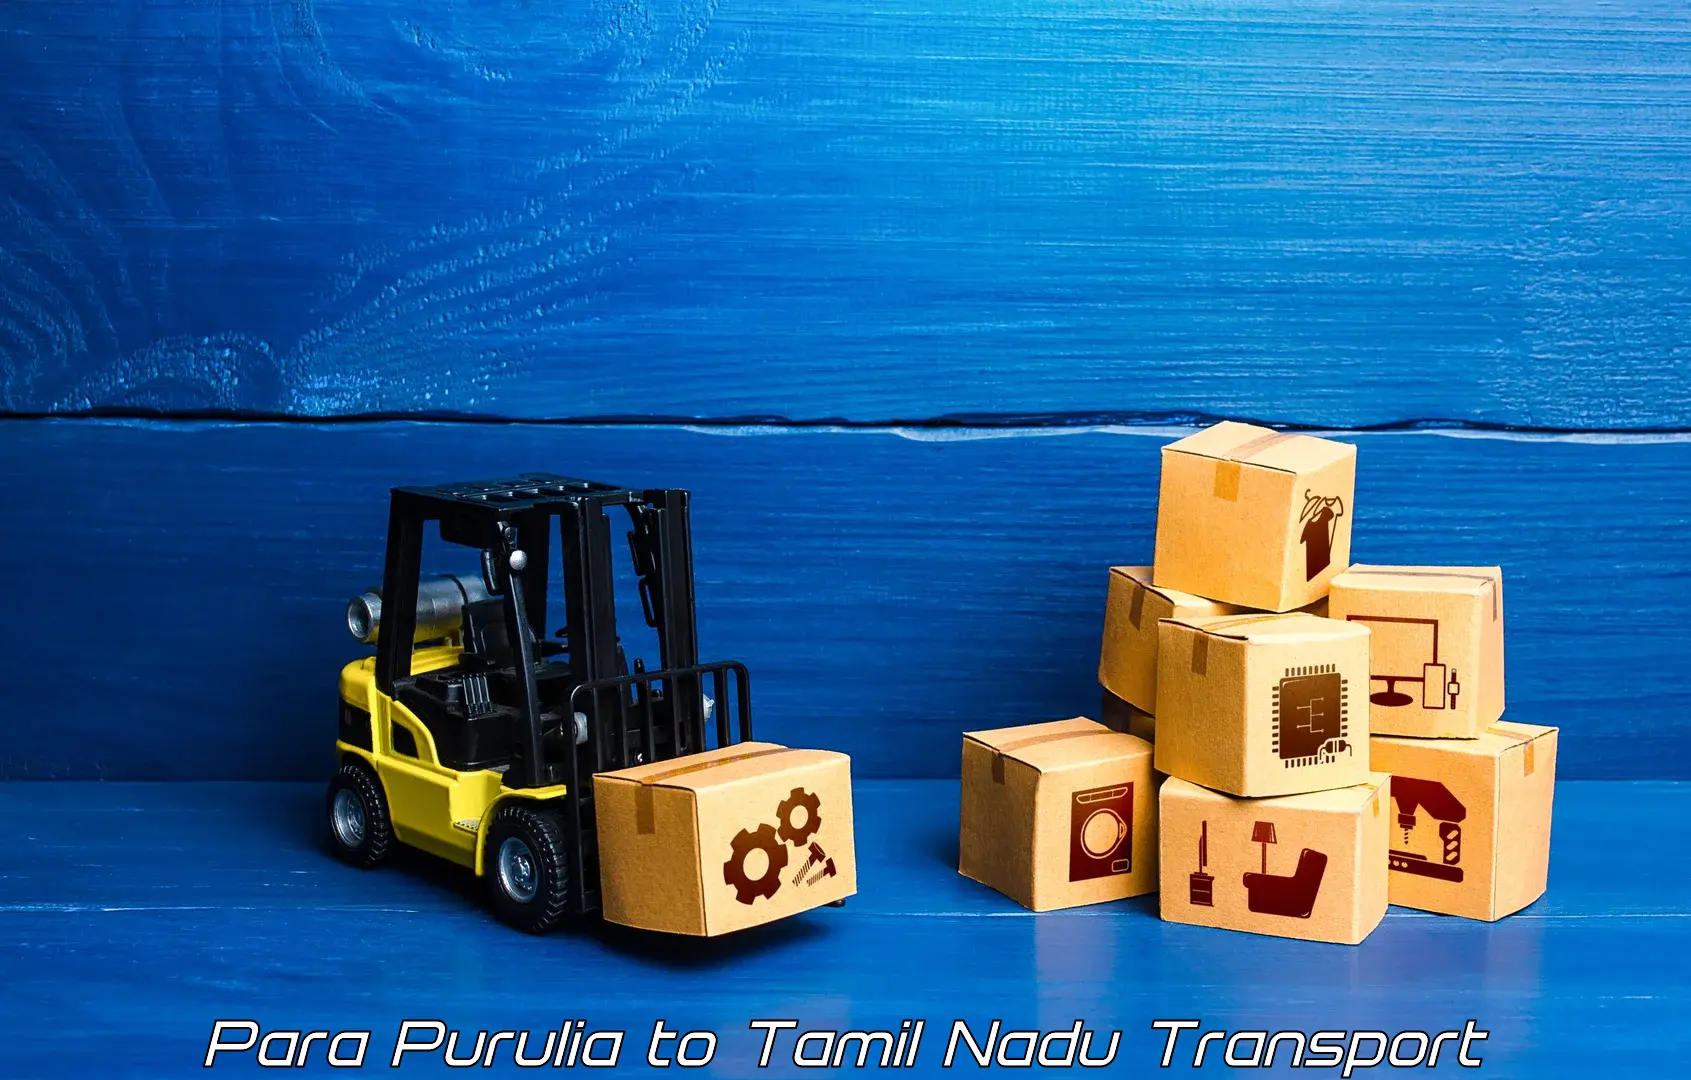 Container transport service Para Purulia to Anthiyur